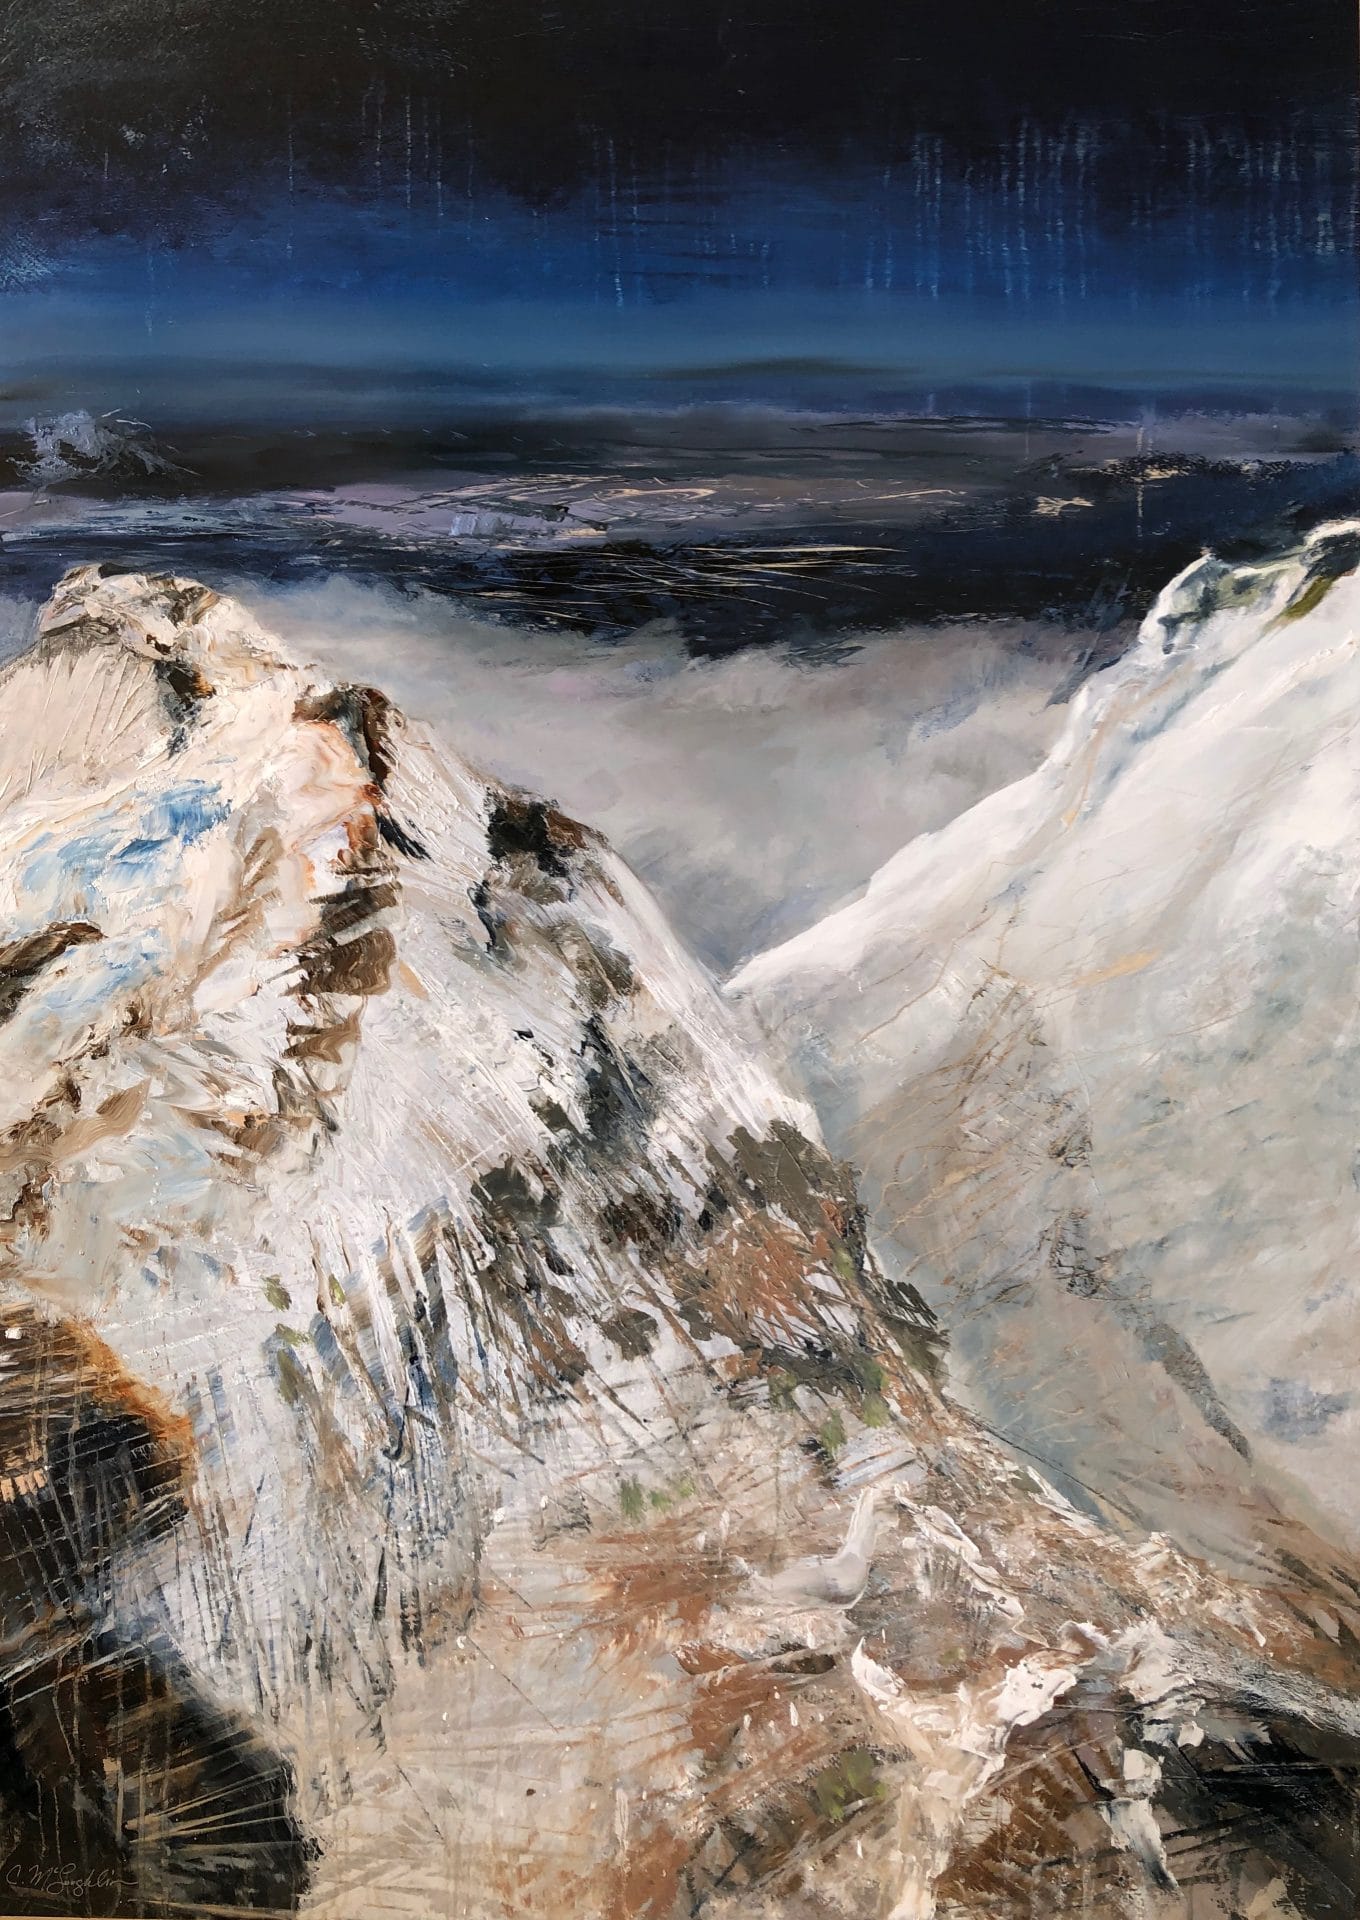 Above the Clouds, oil paint on a brushed aluminum panel, 39" x 51", $6900